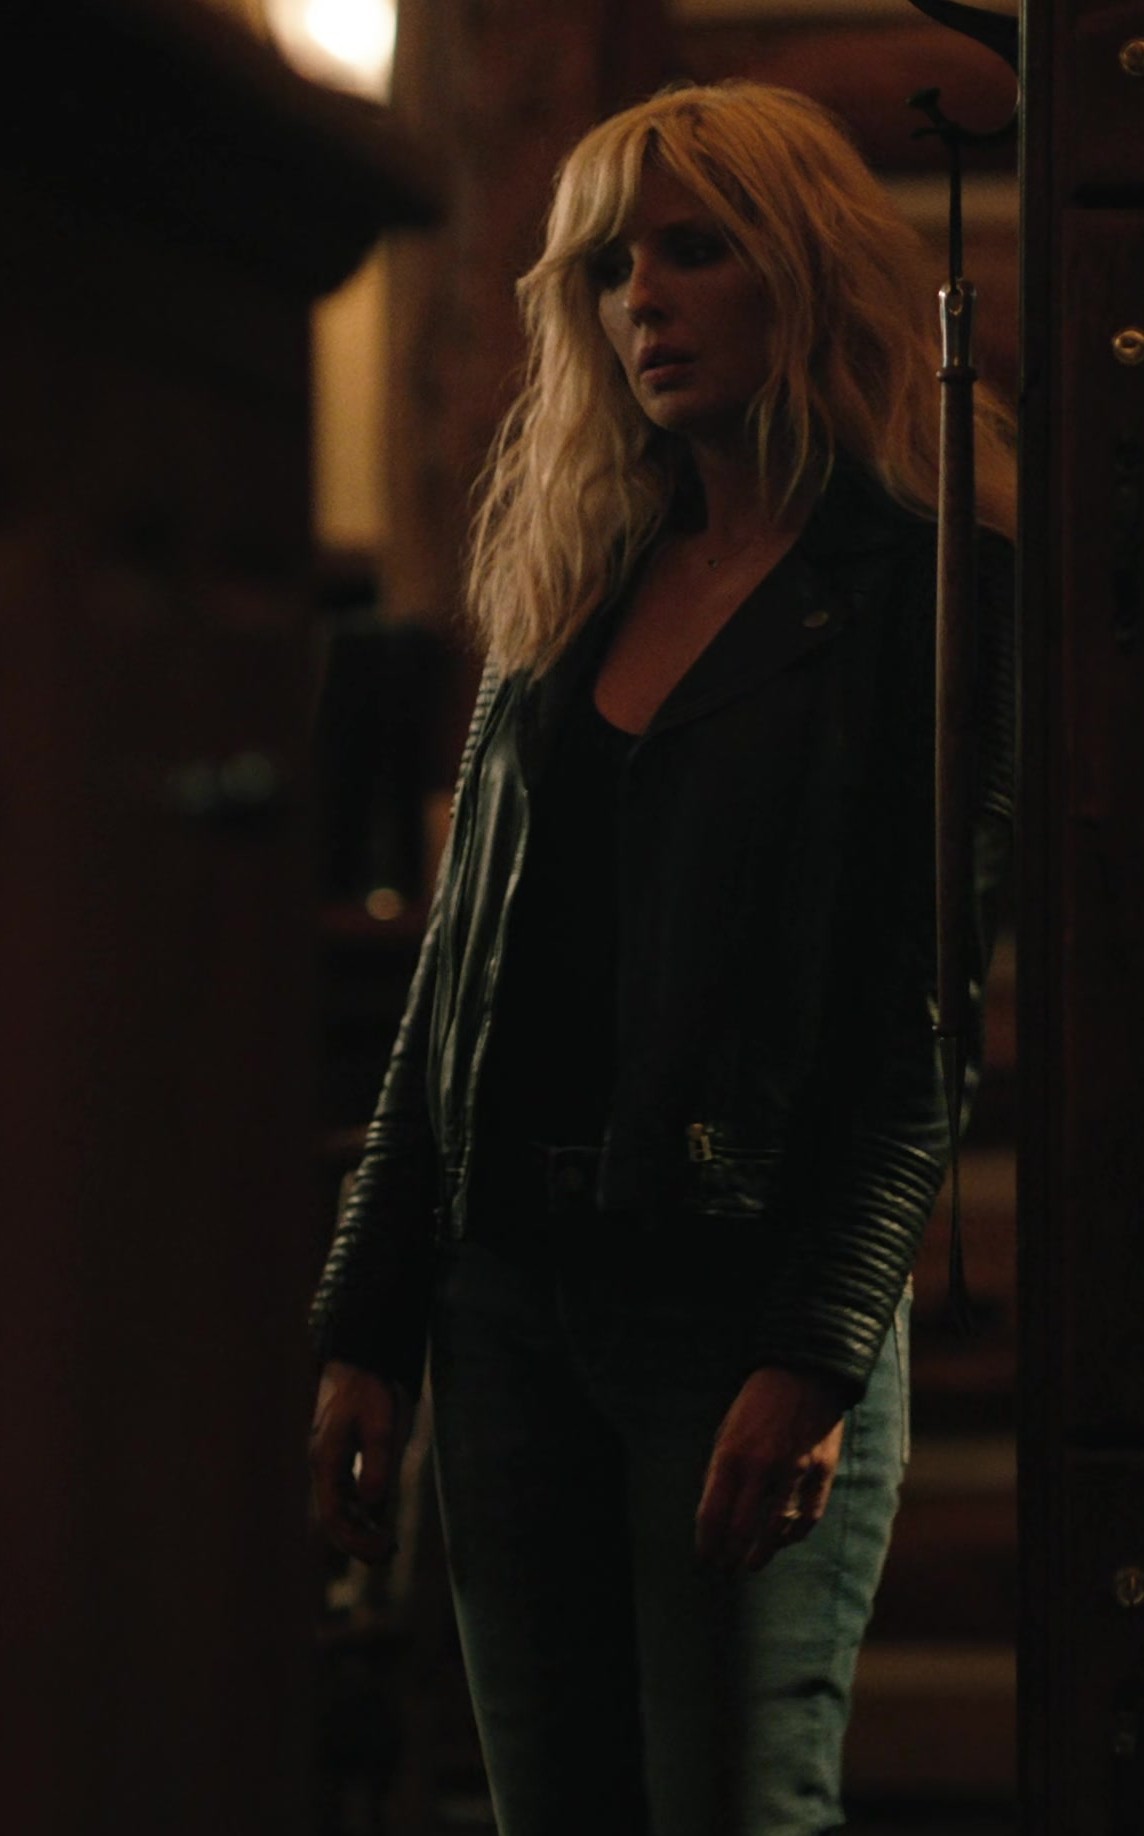 Worn on Yellowstone TV Show - Black Leather Moto Jacket of Kelly Reilly as Bethany "Beth" Dutton